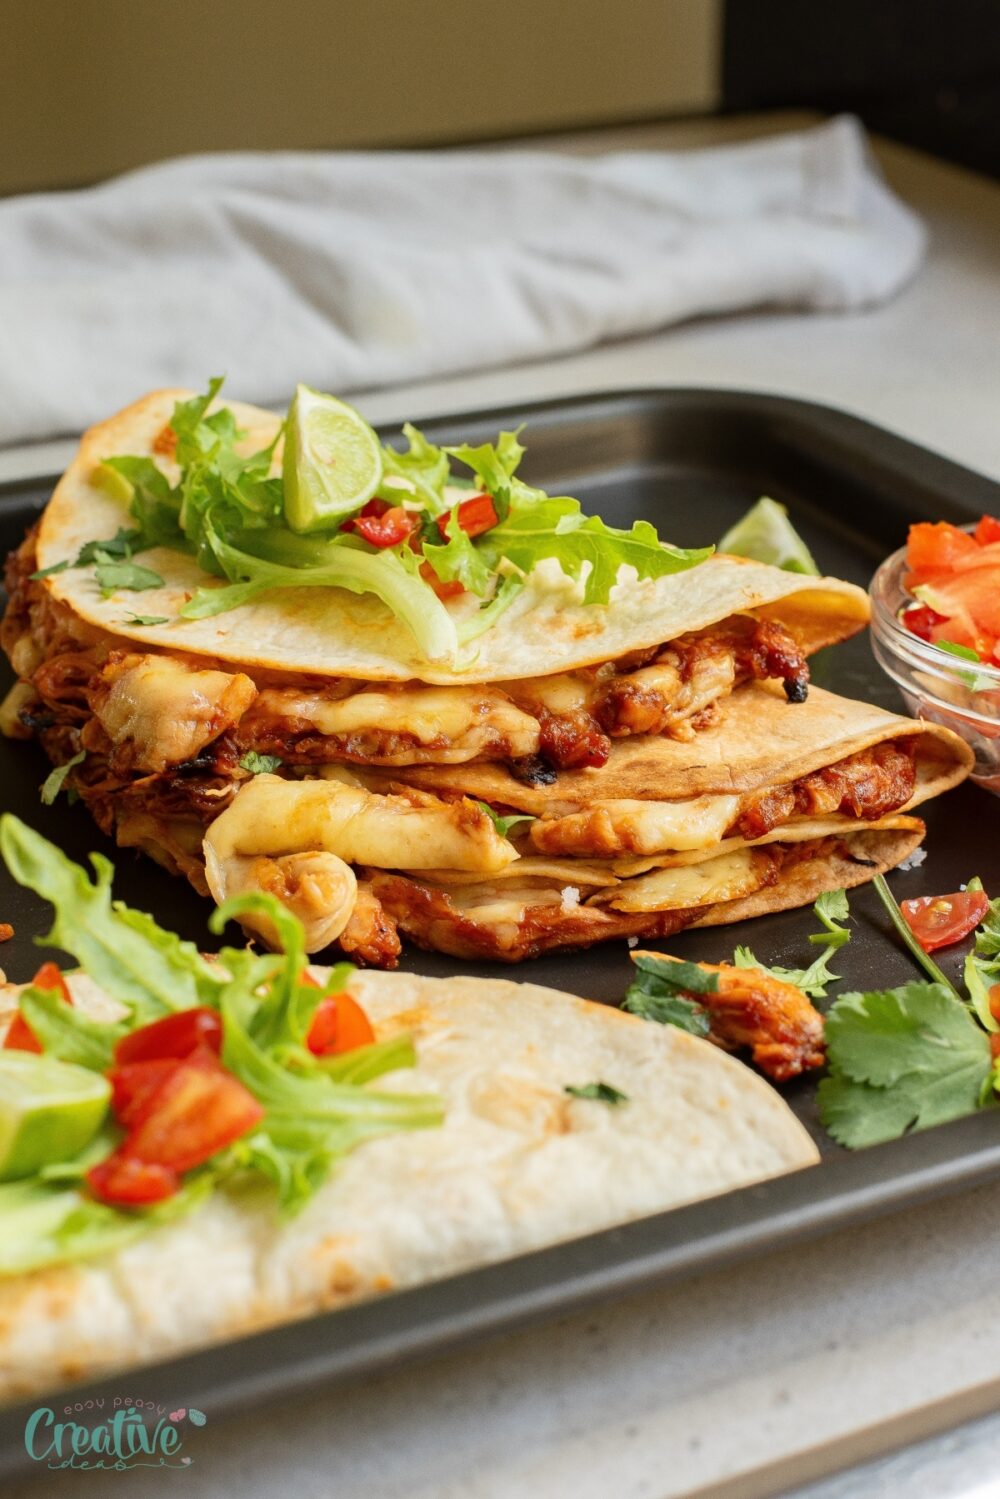 Spice up taco night with these irresistible baked shredded chicken tacos that will satisfy your cravings!